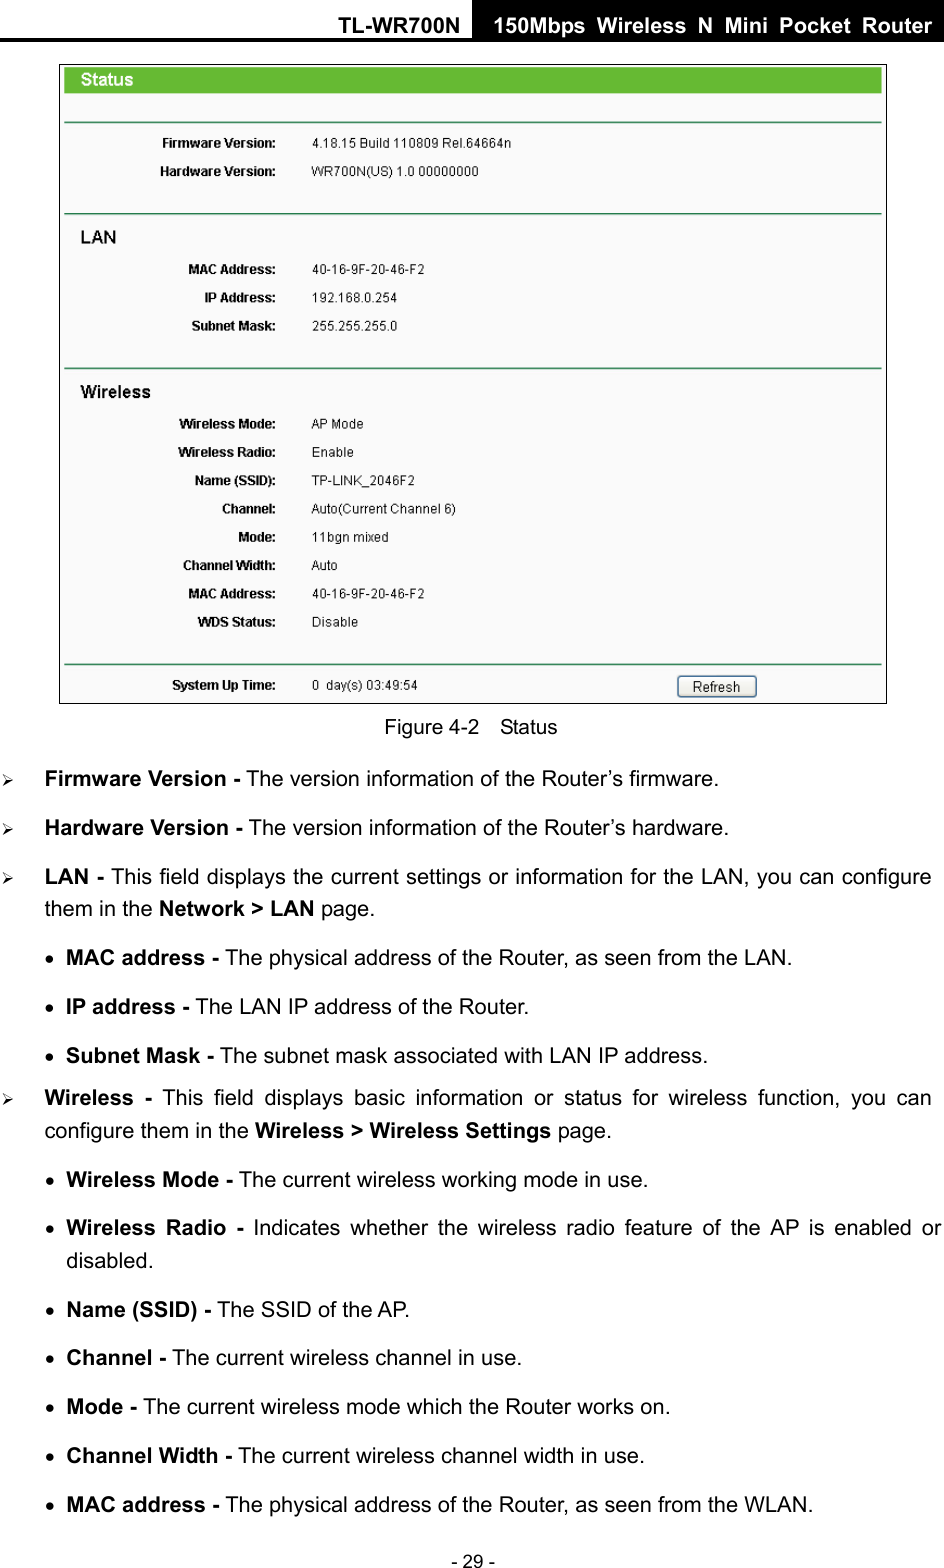 TL-WR700N 150Mbps Wireless N Mini Pocket Router - 29 -  Figure 4-2    Status ¾ Firmware Version - The version information of the Router’s firmware. ¾ Hardware Version - The version information of the Router’s hardware. ¾ LAN - This field displays the current settings or information for the LAN, you can configure them in the Network &gt; LAN page.   • MAC address - The physical address of the Router, as seen from the LAN. • IP address - The LAN IP address of the Router. • Subnet Mask - The subnet mask associated with LAN IP address. ¾ Wireless -  This field displays basic information or status for wireless function, you can configure them in the Wireless &gt; Wireless Settings page.   • Wireless Mode - The current wireless working mode in use. • Wireless Radio - Indicates whether the wireless radio feature of the AP is enabled or disabled. • Name (SSID) - The SSID of the AP. • Channel - The current wireless channel in use. • Mode - The current wireless mode which the Router works on. • Channel Width - The current wireless channel width in use. • MAC address - The physical address of the Router, as seen from the WLAN. 